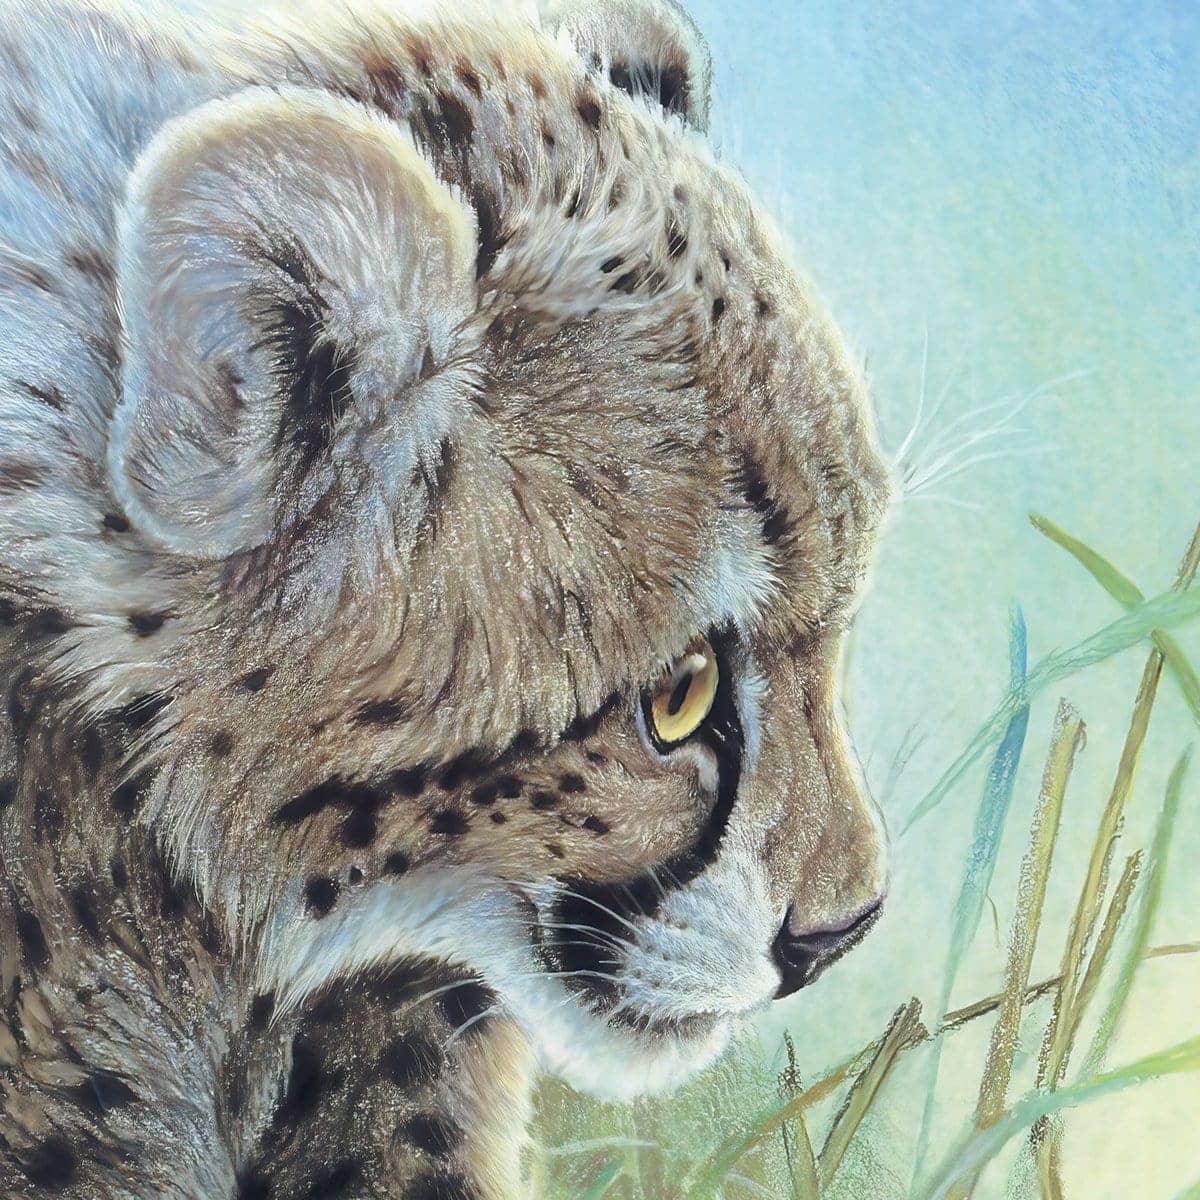 Young Cheetah with Fireflies - Art Print | Artwork by Glen Loates